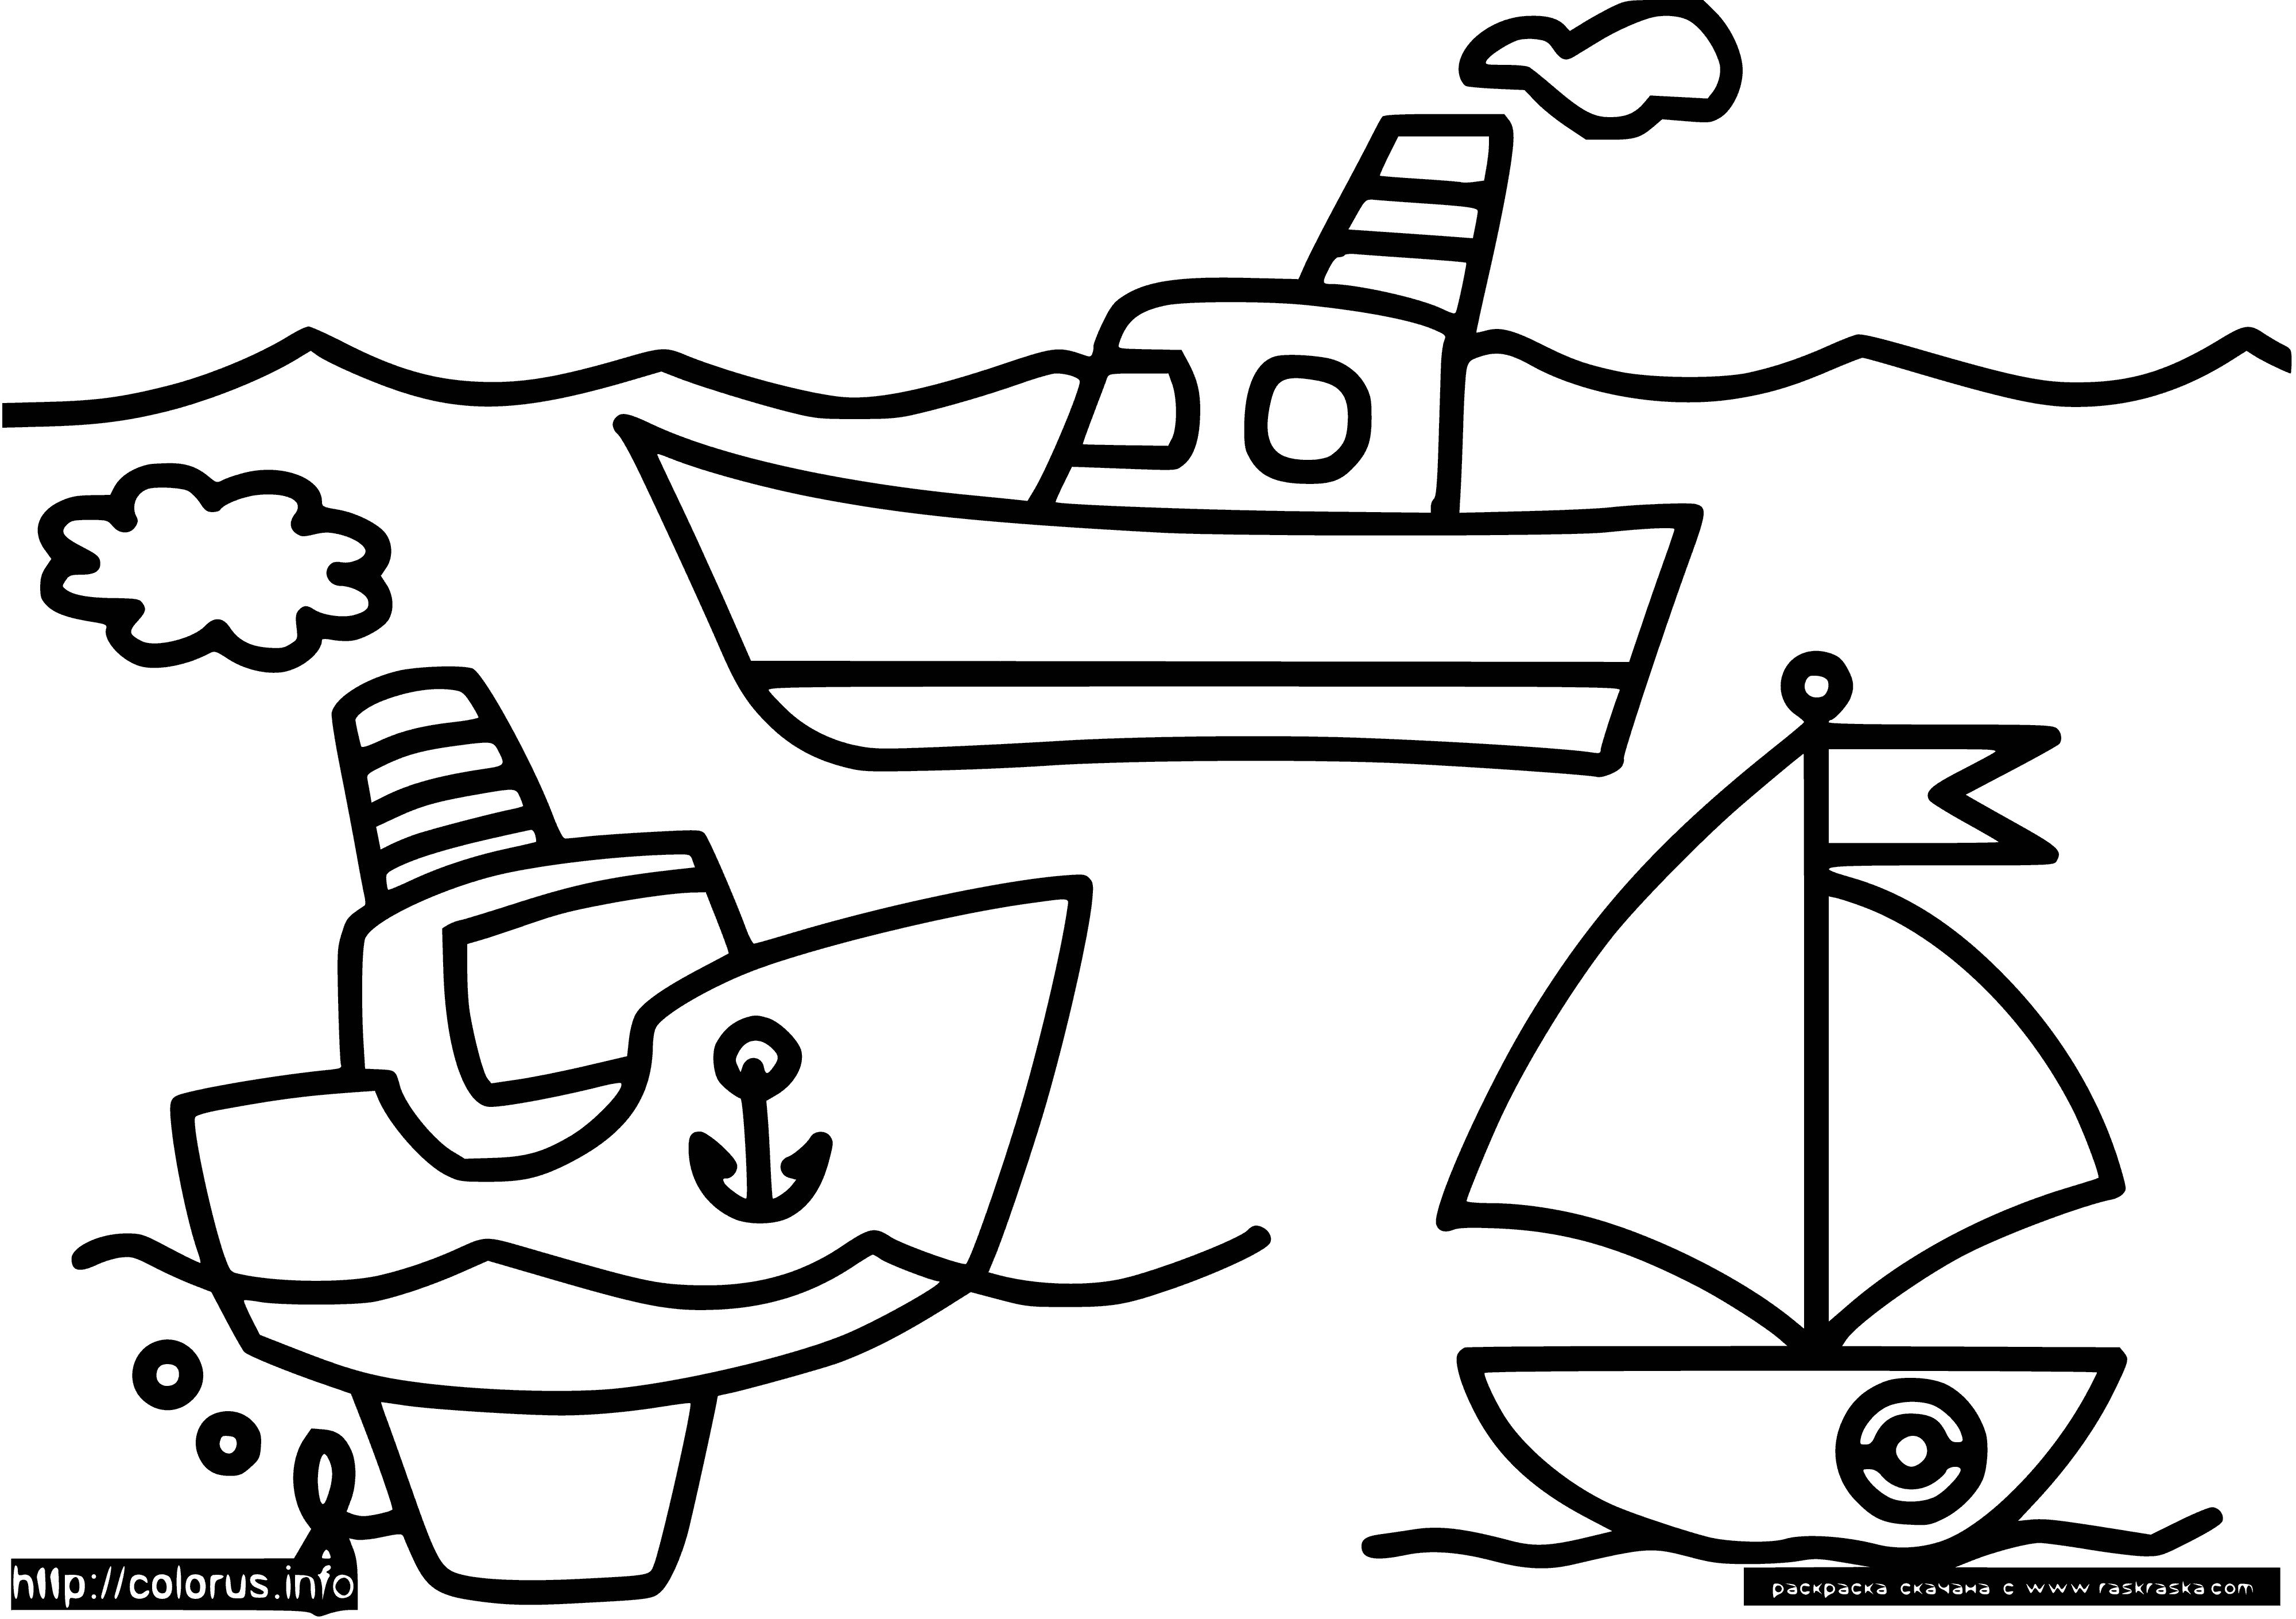 coloring page: Ships sailing on blue sea with white-crested waves.